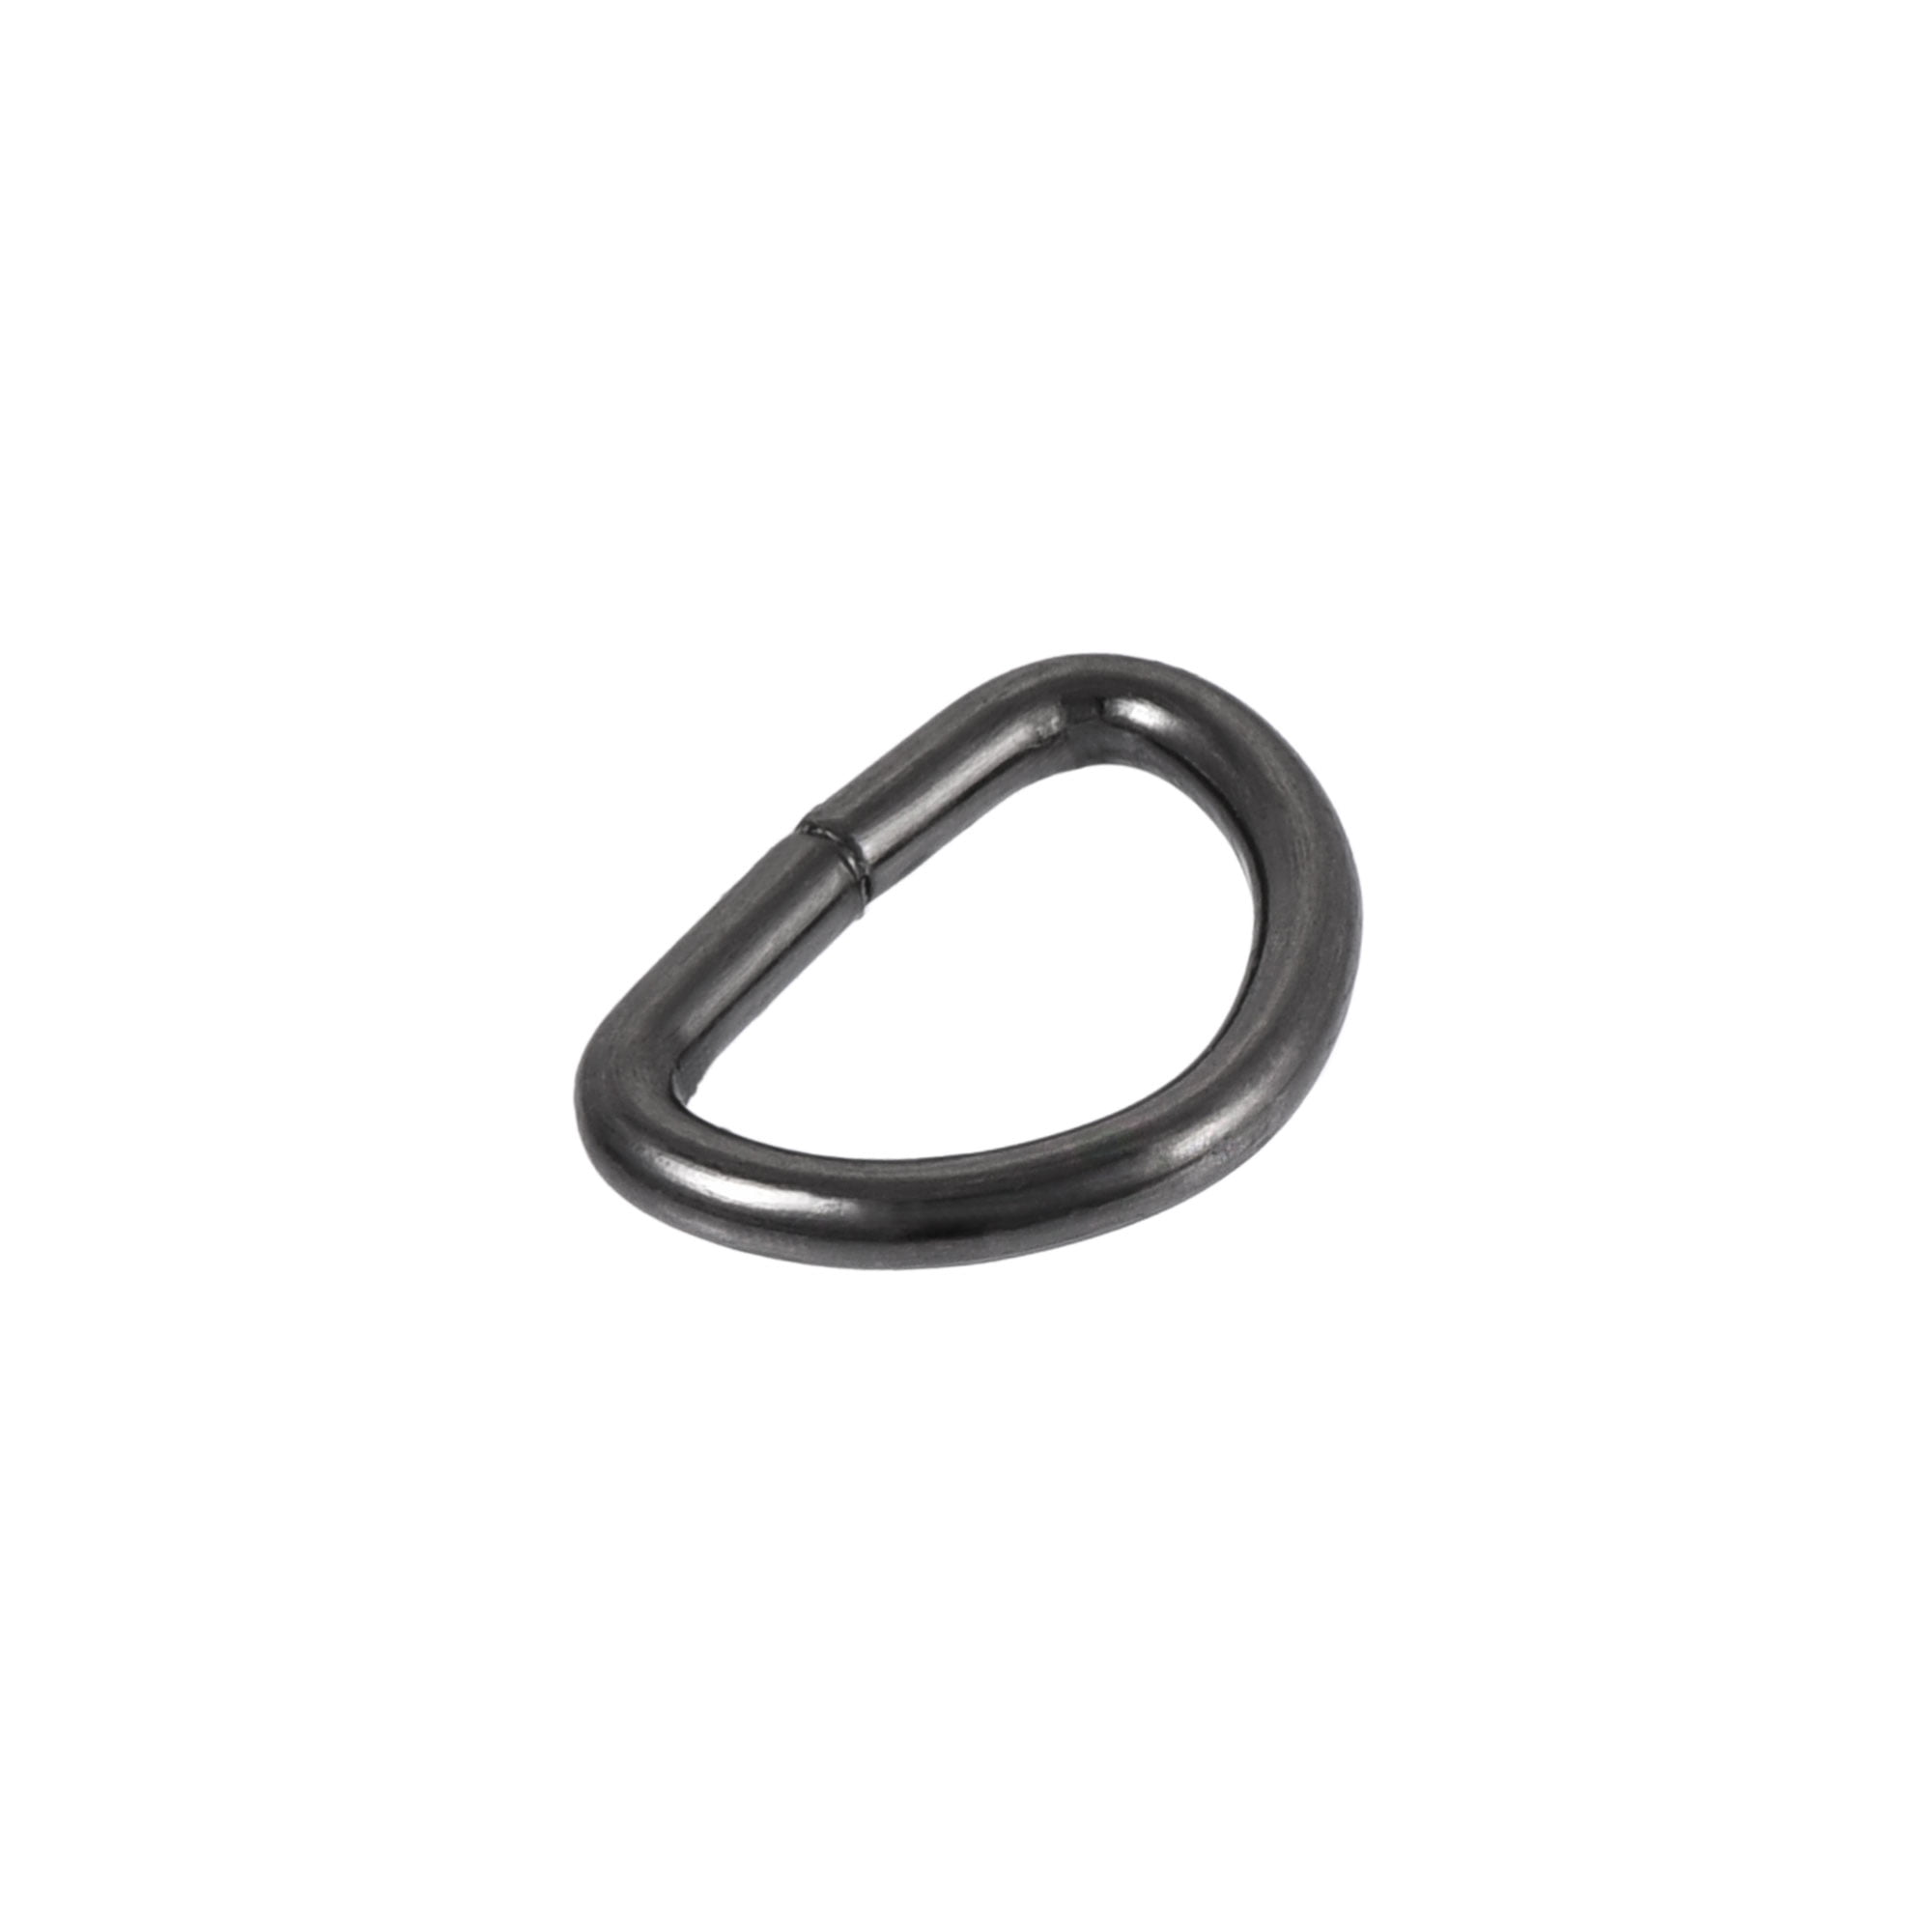 10mm D-Rings Buckle for Hardware Bags Belts Craft DIY Accessories Black 100pcs sourcing map Metal D Ring 0.39